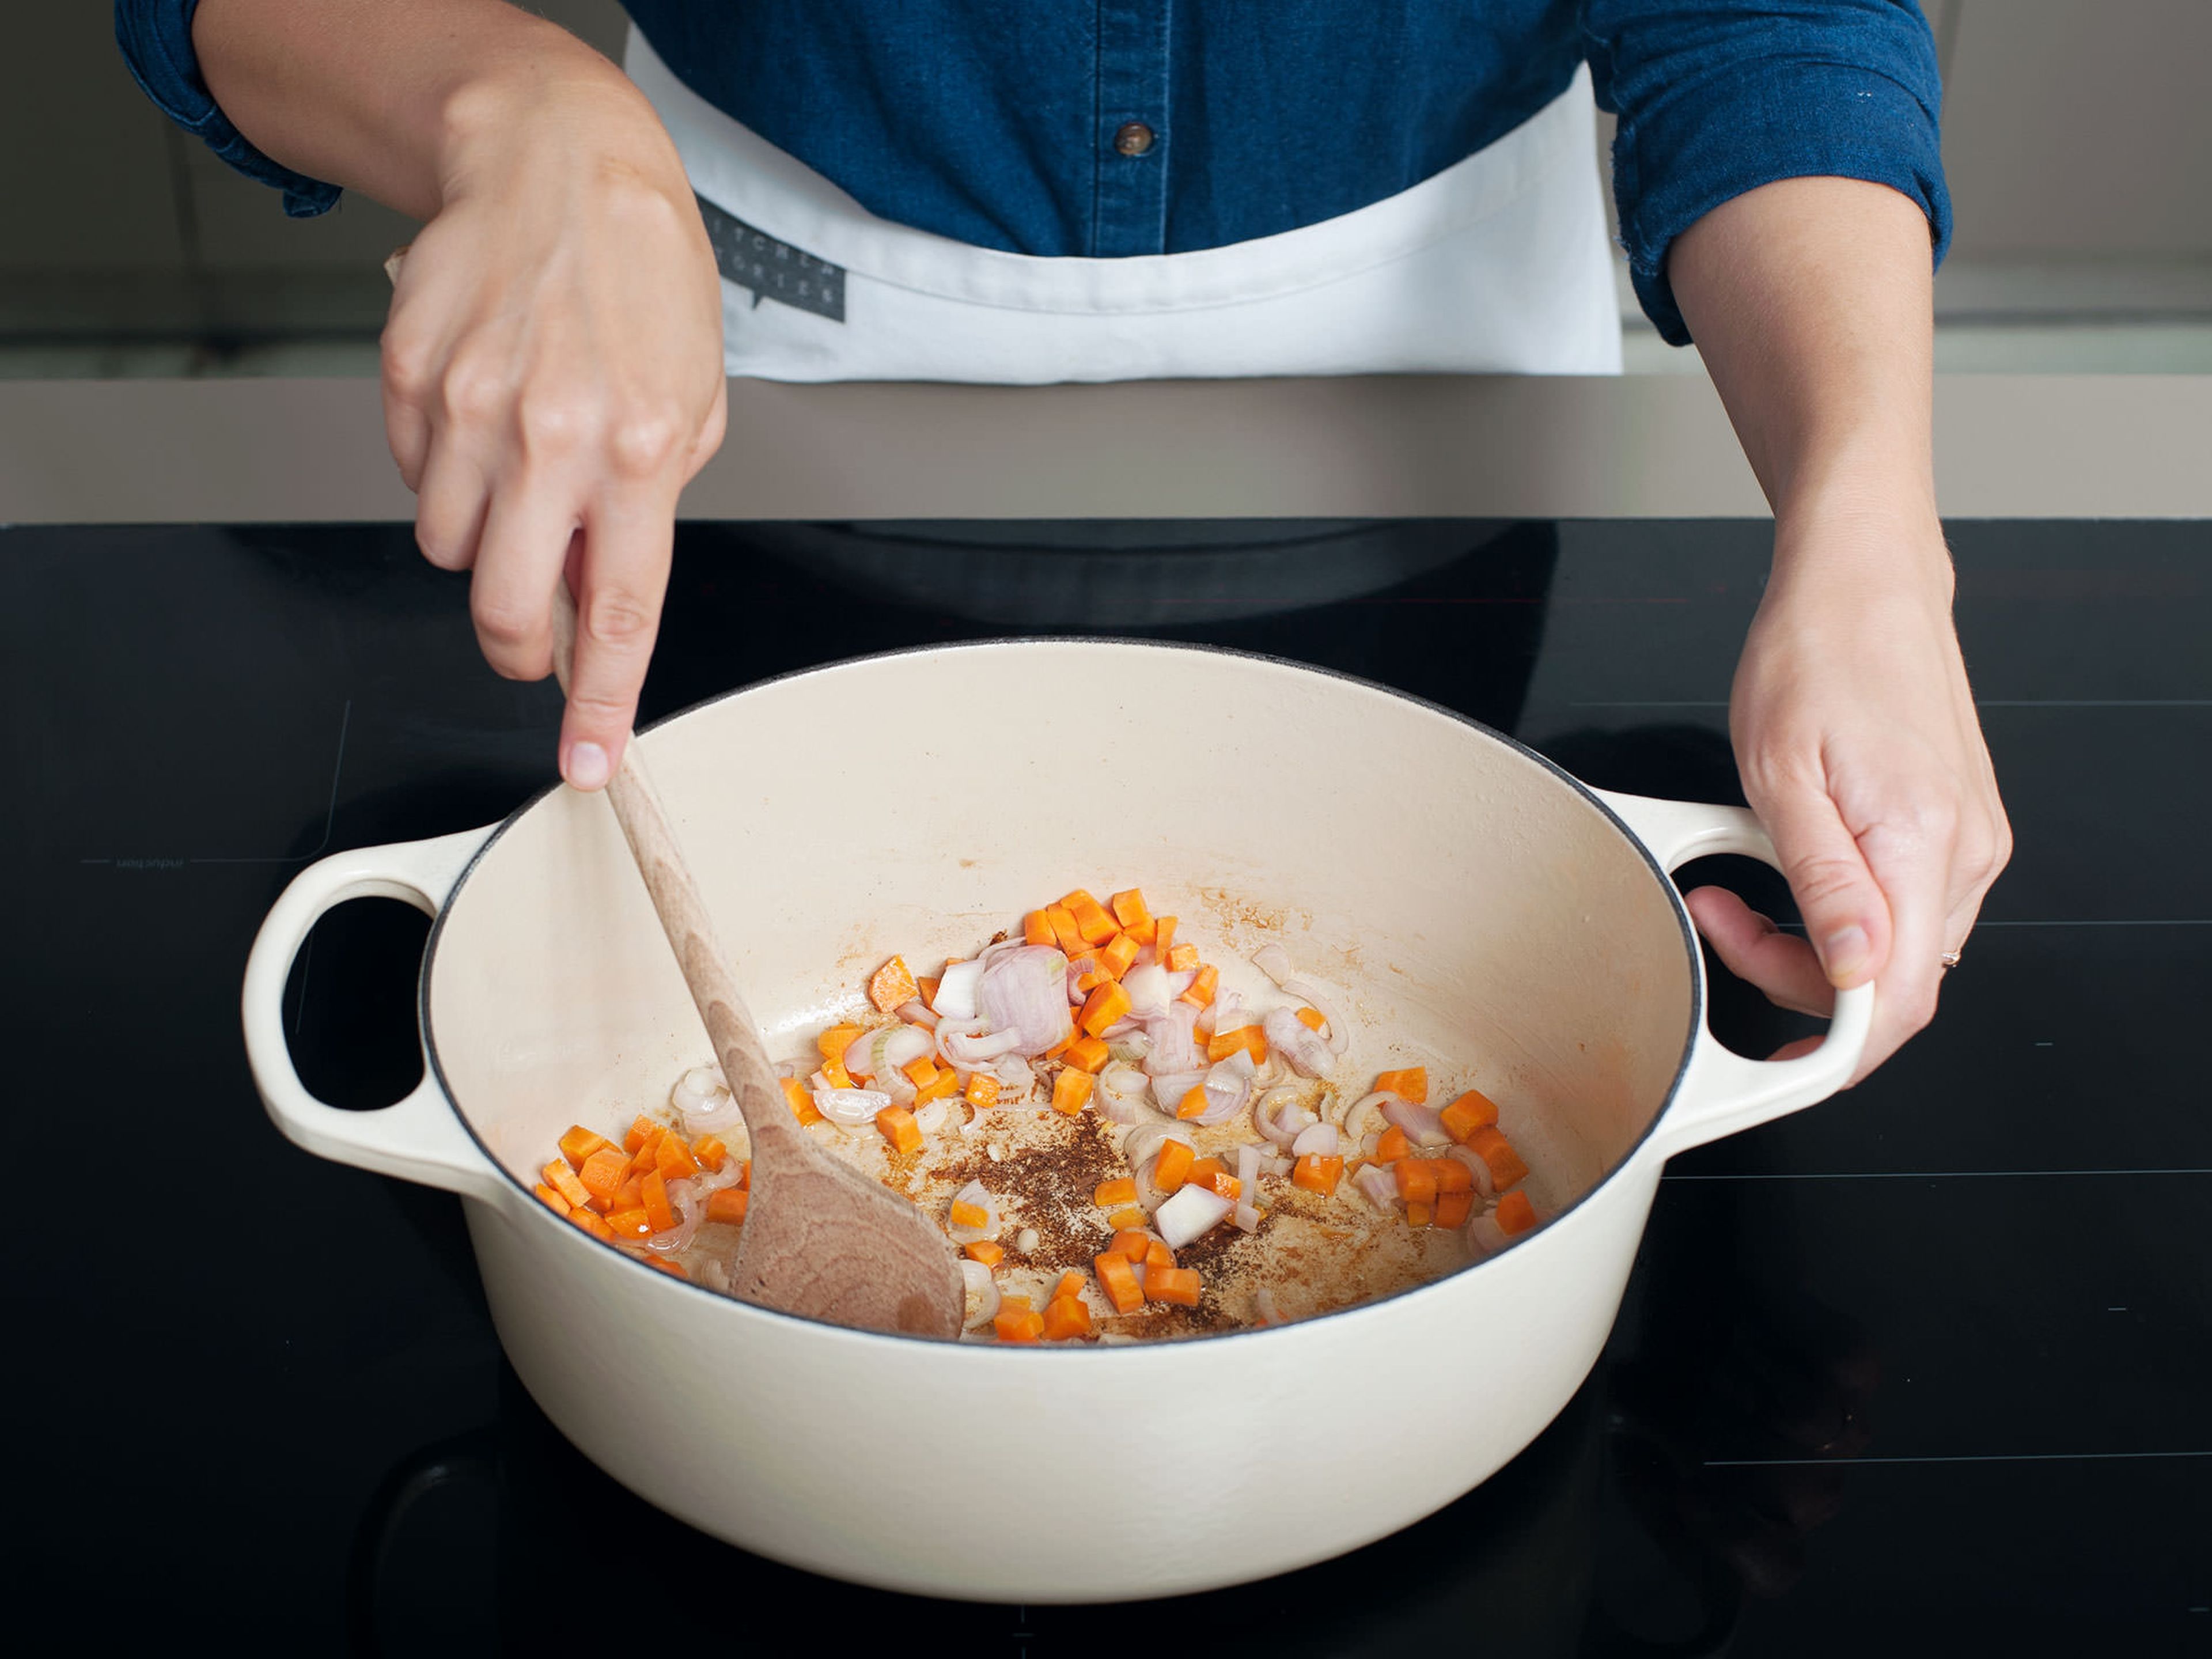 Preheat oven to 150°C/300°F. Pour off almost all fat from pot, leaving some fat to coat the bottom for browning. Then, add carrots, garlic, and shallots. Sauté over medium-high heat for approx. 3 – 5 min. until vegetables soften and become fragrant.